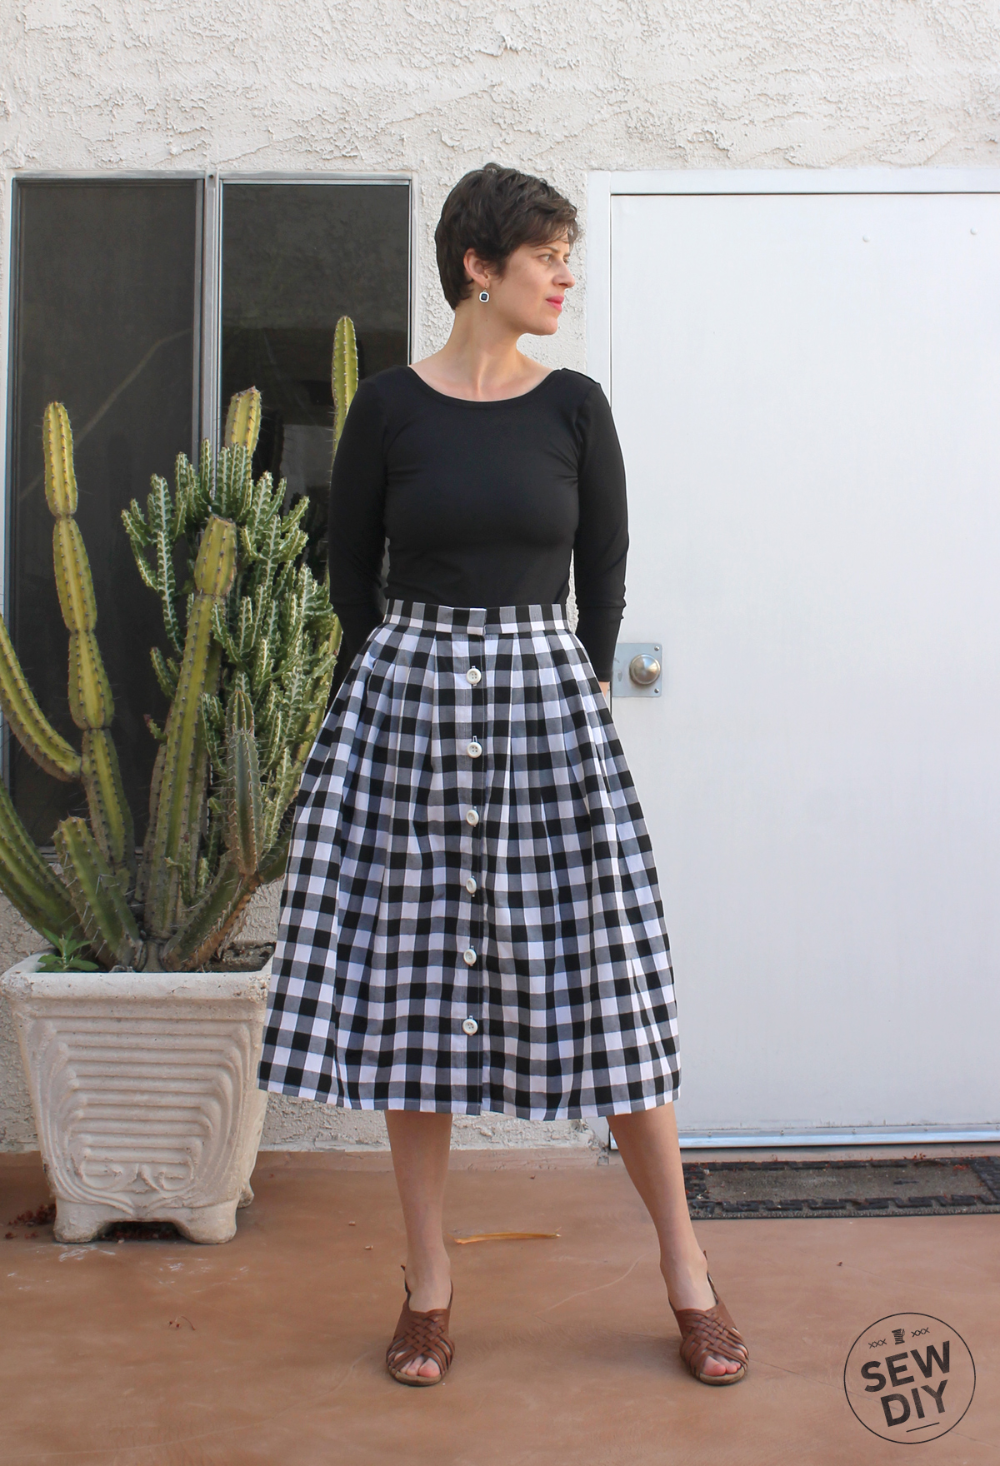 The Versatile Appeal of Button Front
Skirts: How to Wear Them for Any Occasion